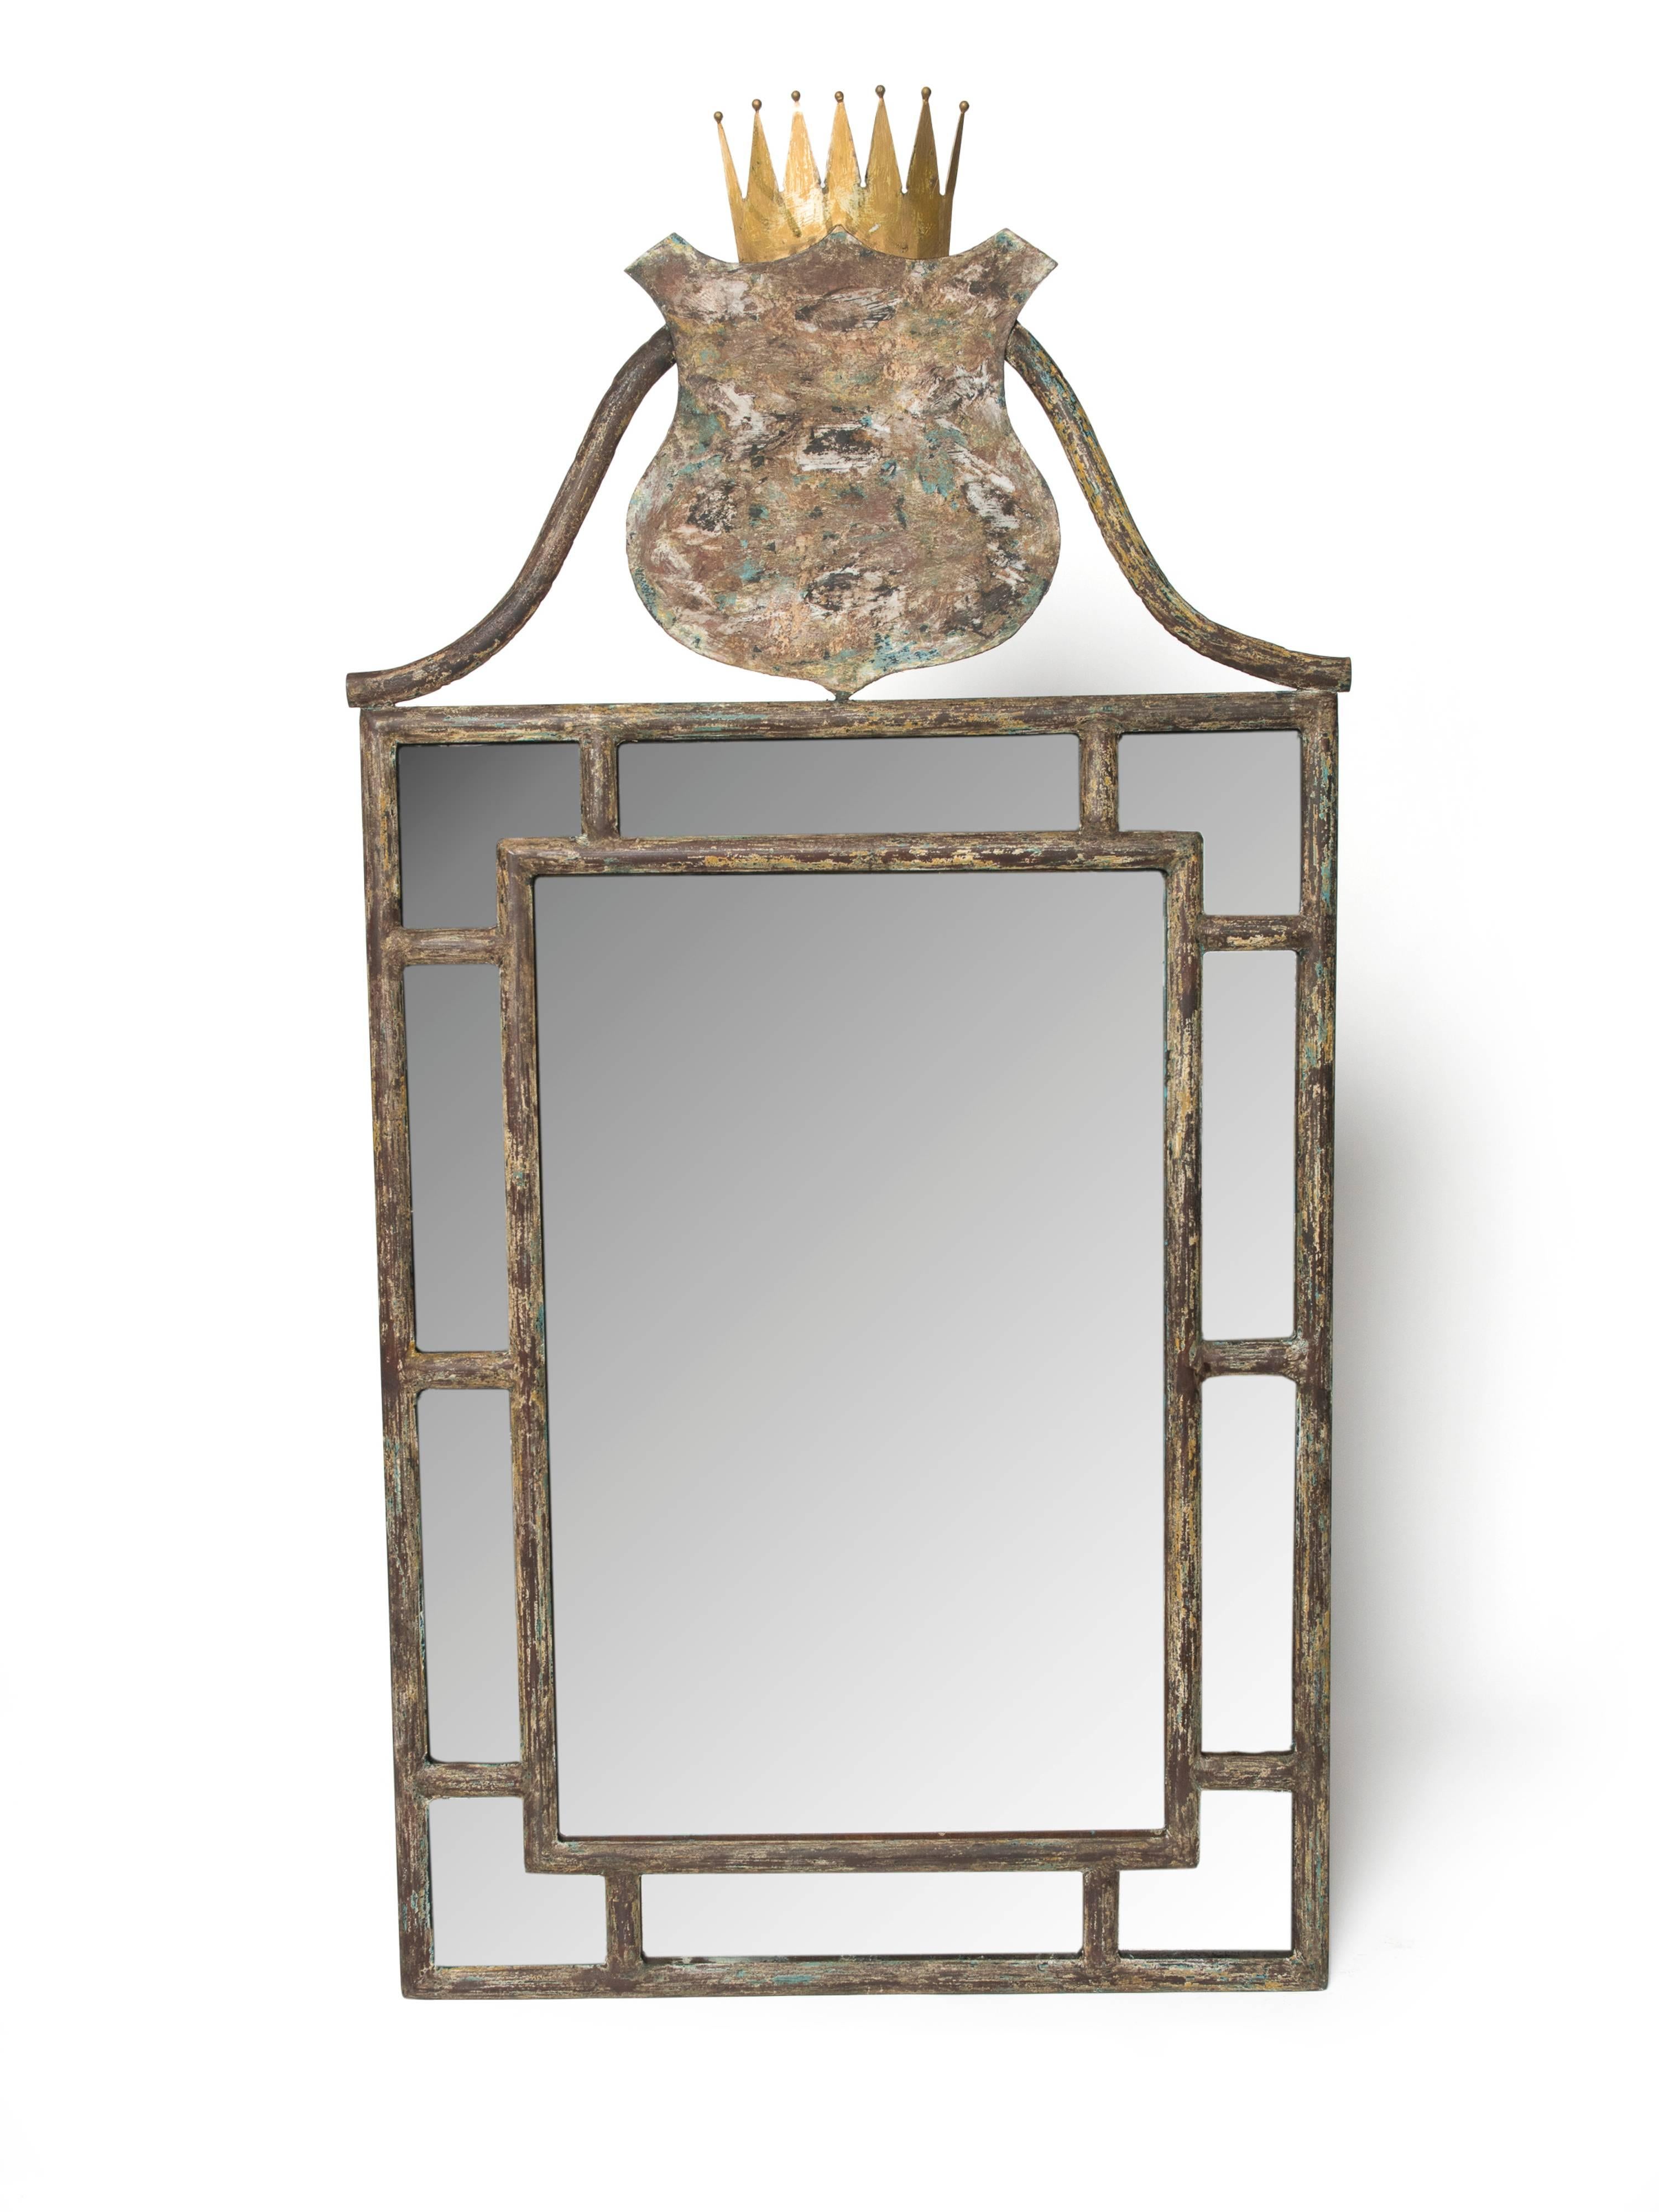 Provençal painted tole mirrors with crown decoration on the top.